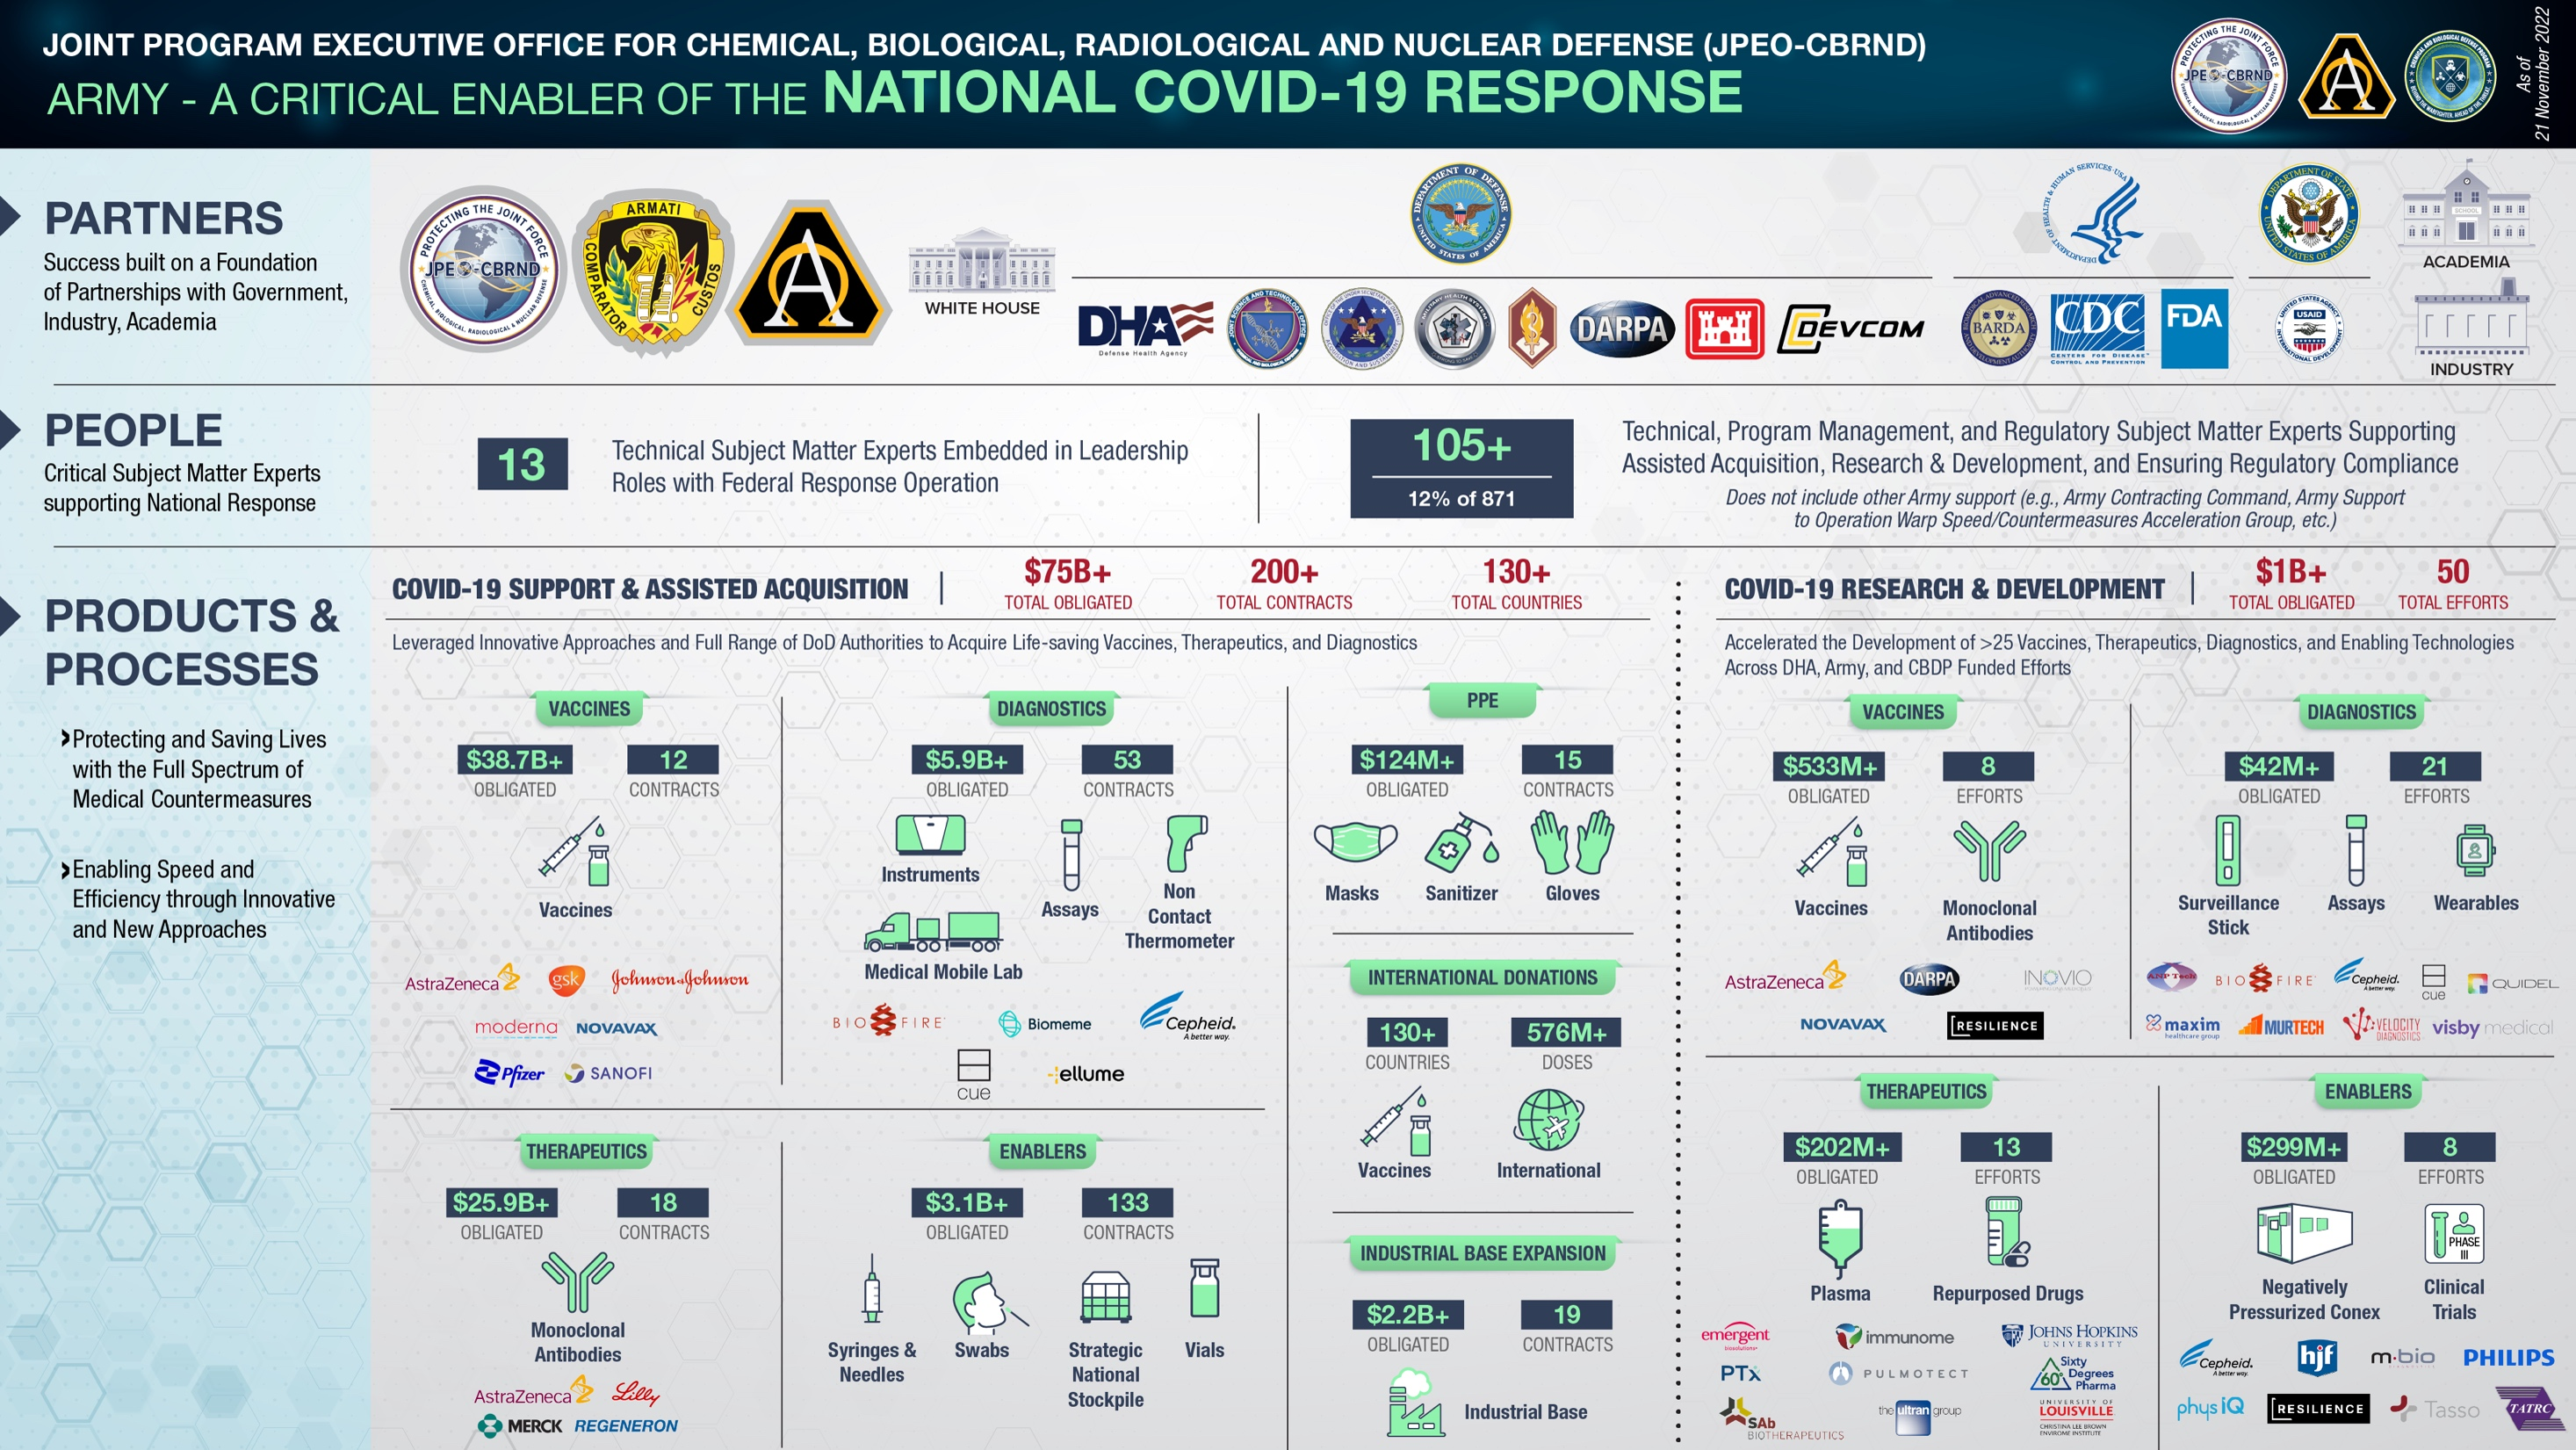 JPEO's and the Army's support to the COVID-19 response, with our partners, people, products & processes